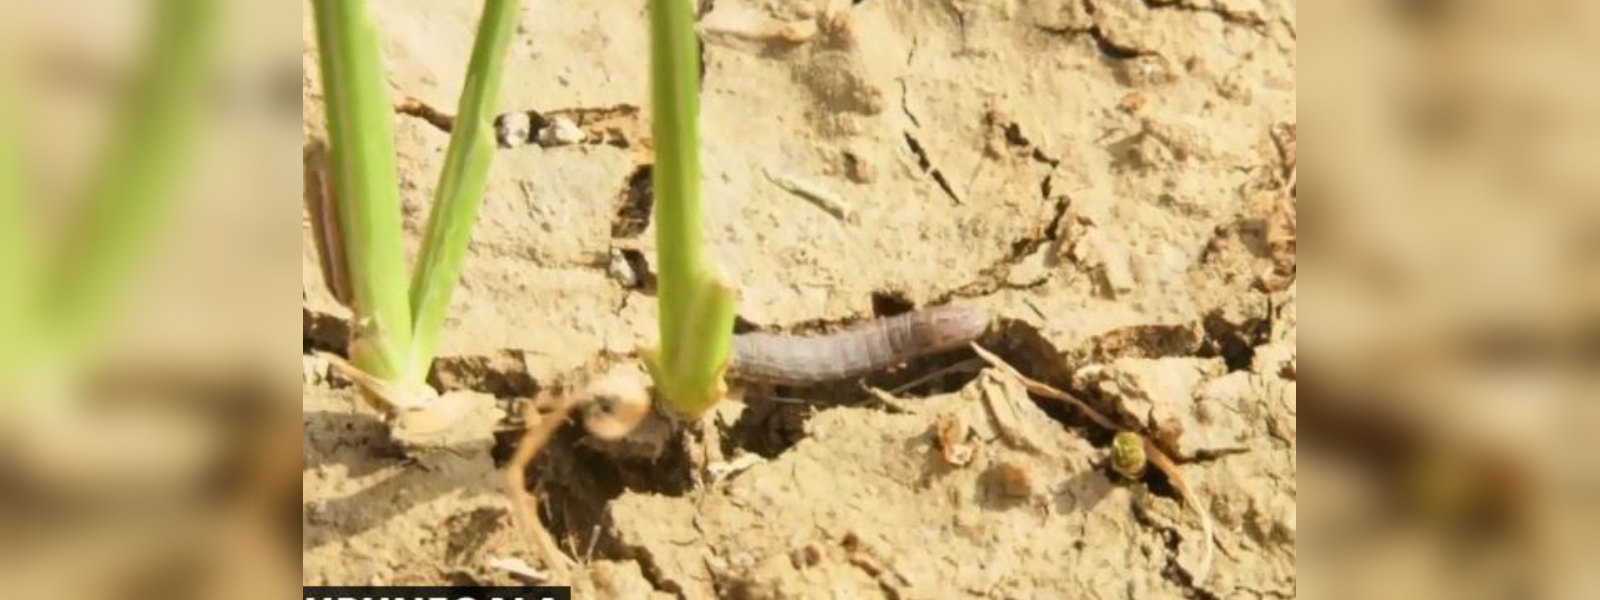 Crops ruined as agro pest raises head in several parts of the country